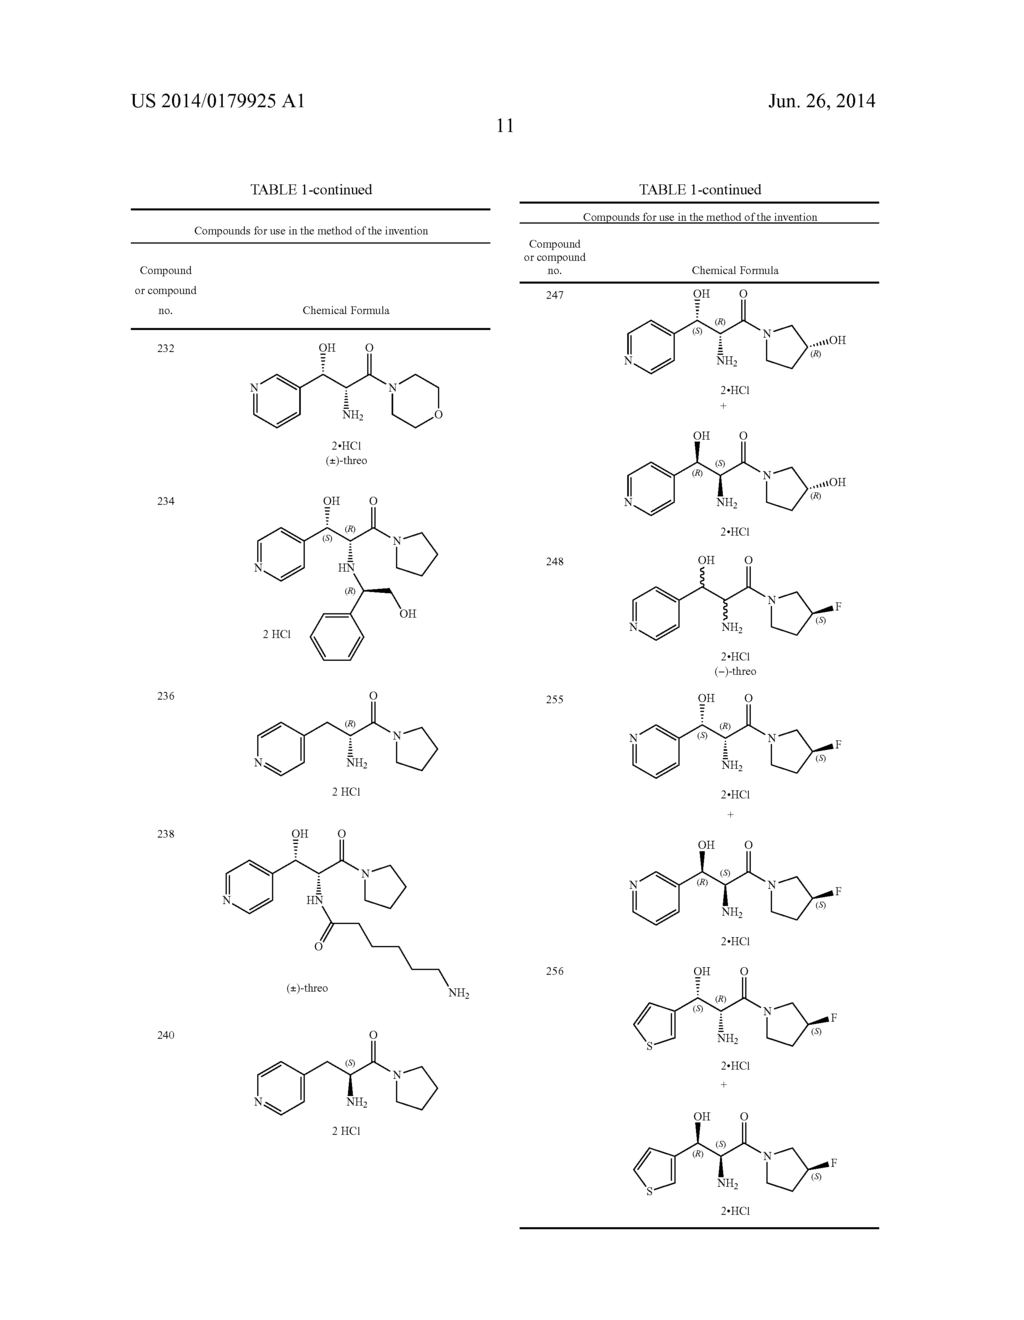 METHODS FOR TREATING COGNITIVE DISORDERS USING     3-ARYL-3-HYDROXY-2-AMINO-PROPIONIC ACID AMIDES,     3-HETEROARYL-3-HYDROXY-2-AMINO-PROPIONIC ACID AMIDES AND RELATED     COMPOUNDS - diagram, schematic, and image 12